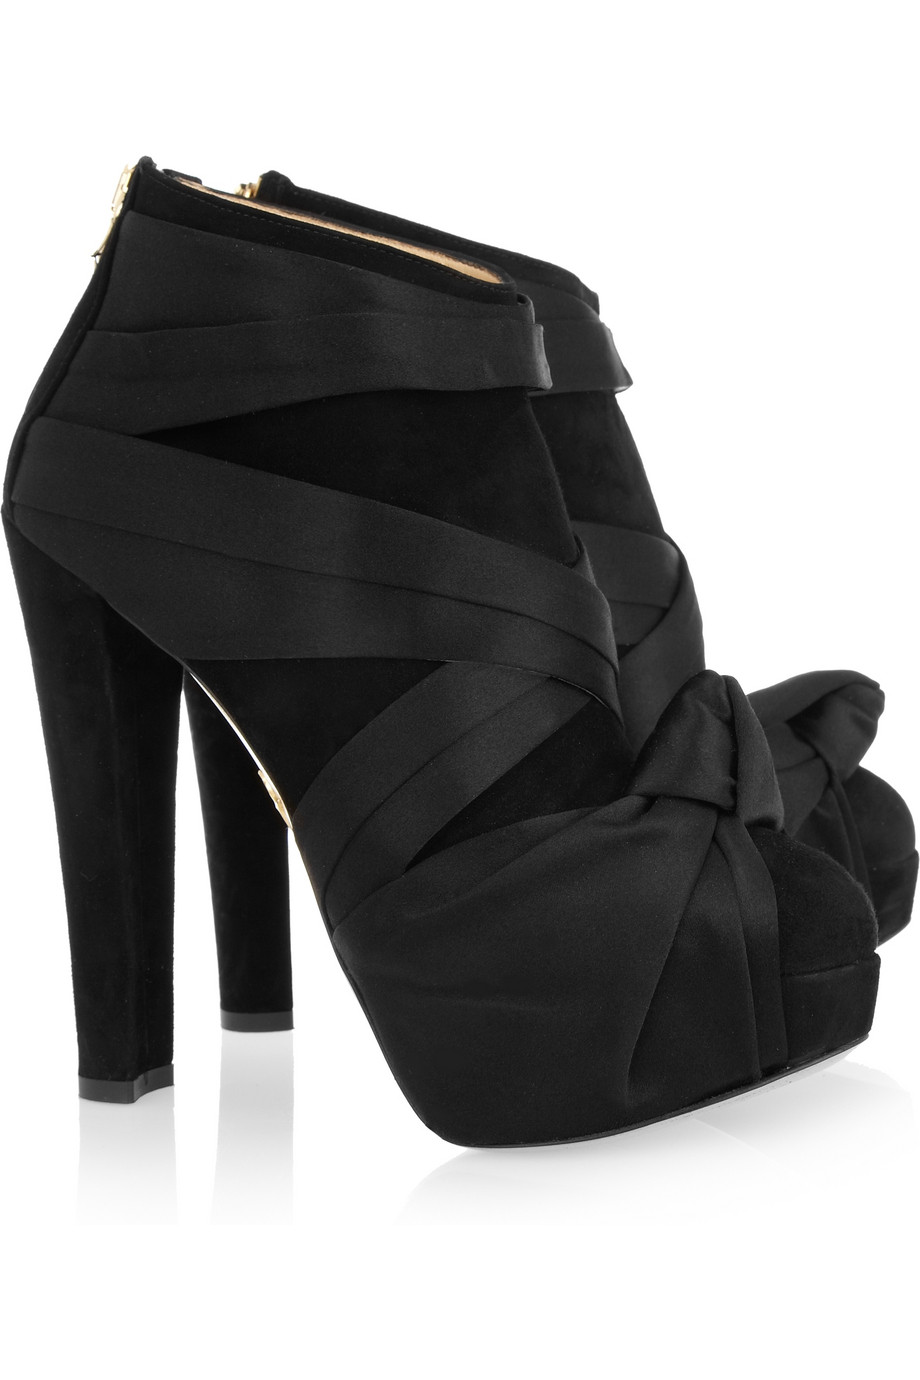 Lyst - Charlotte olympia Emilio Suede and Satin Ankle Boots in Black